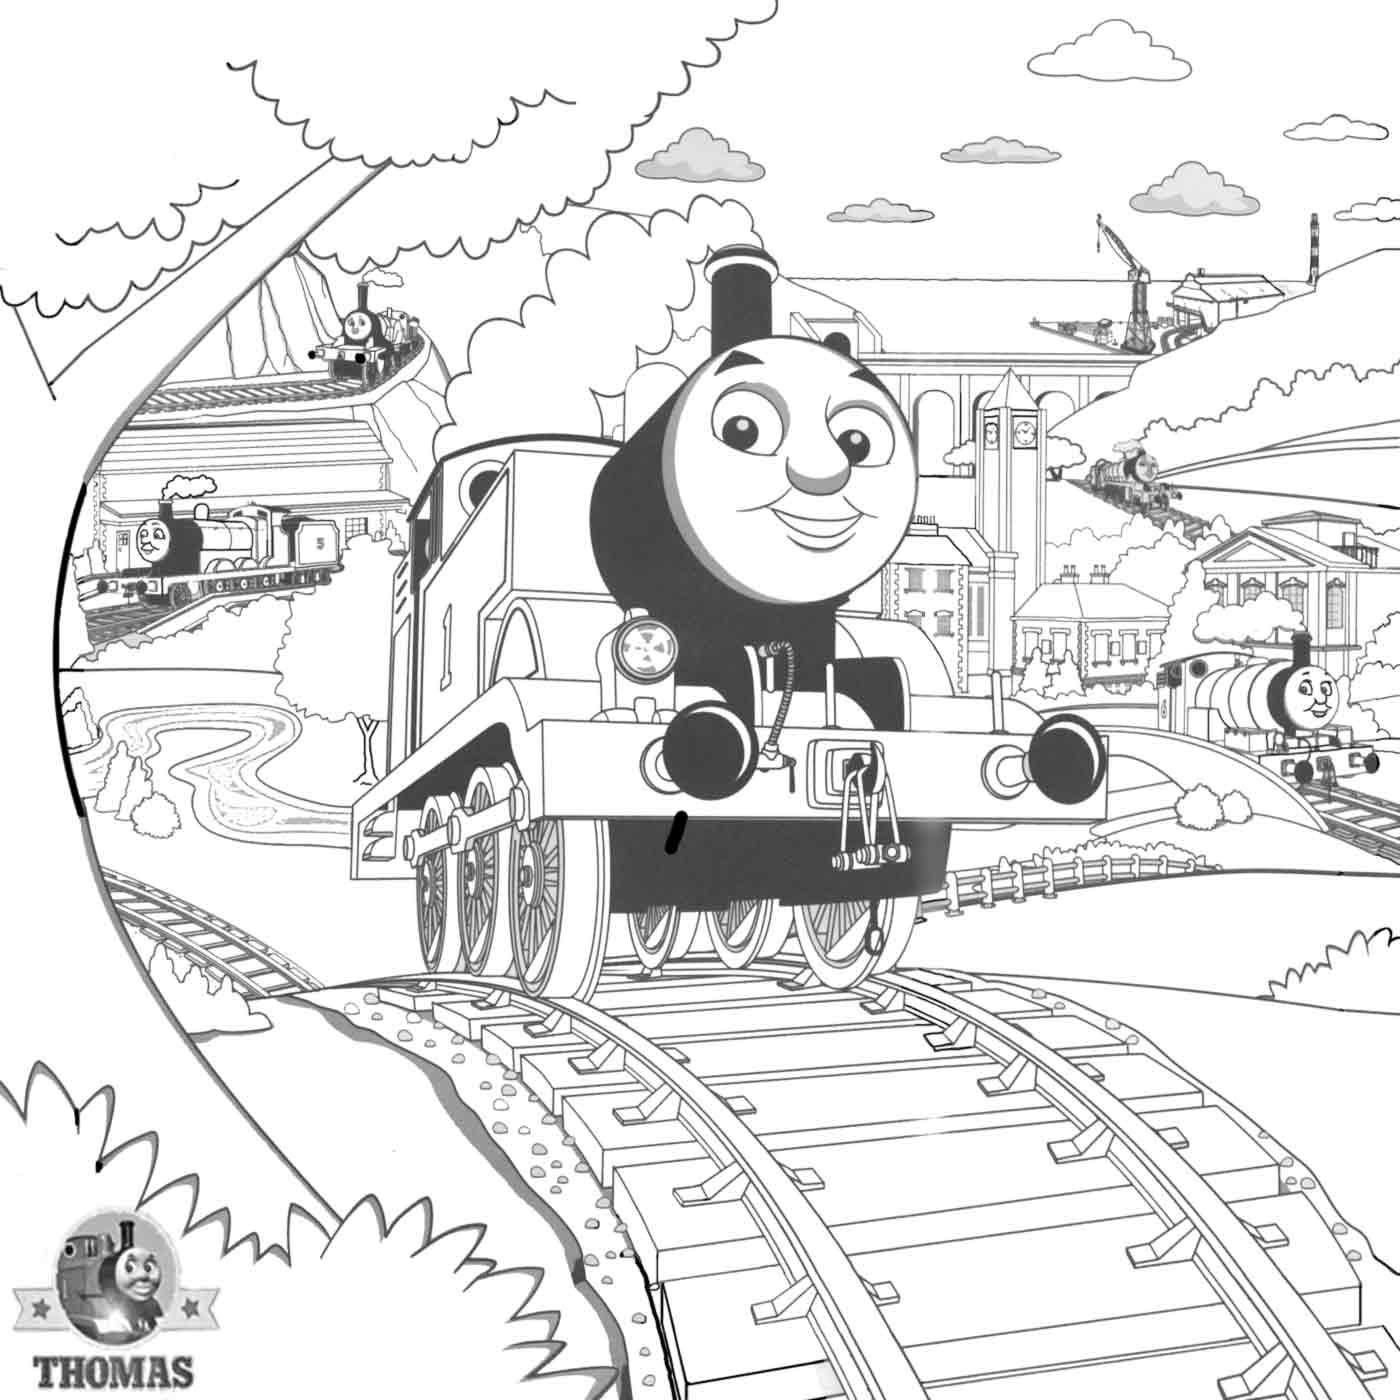 Thomas Coloring Pages Printable Coloring Pages Thomasheank Engine Drawing At Getdrawings Com Free